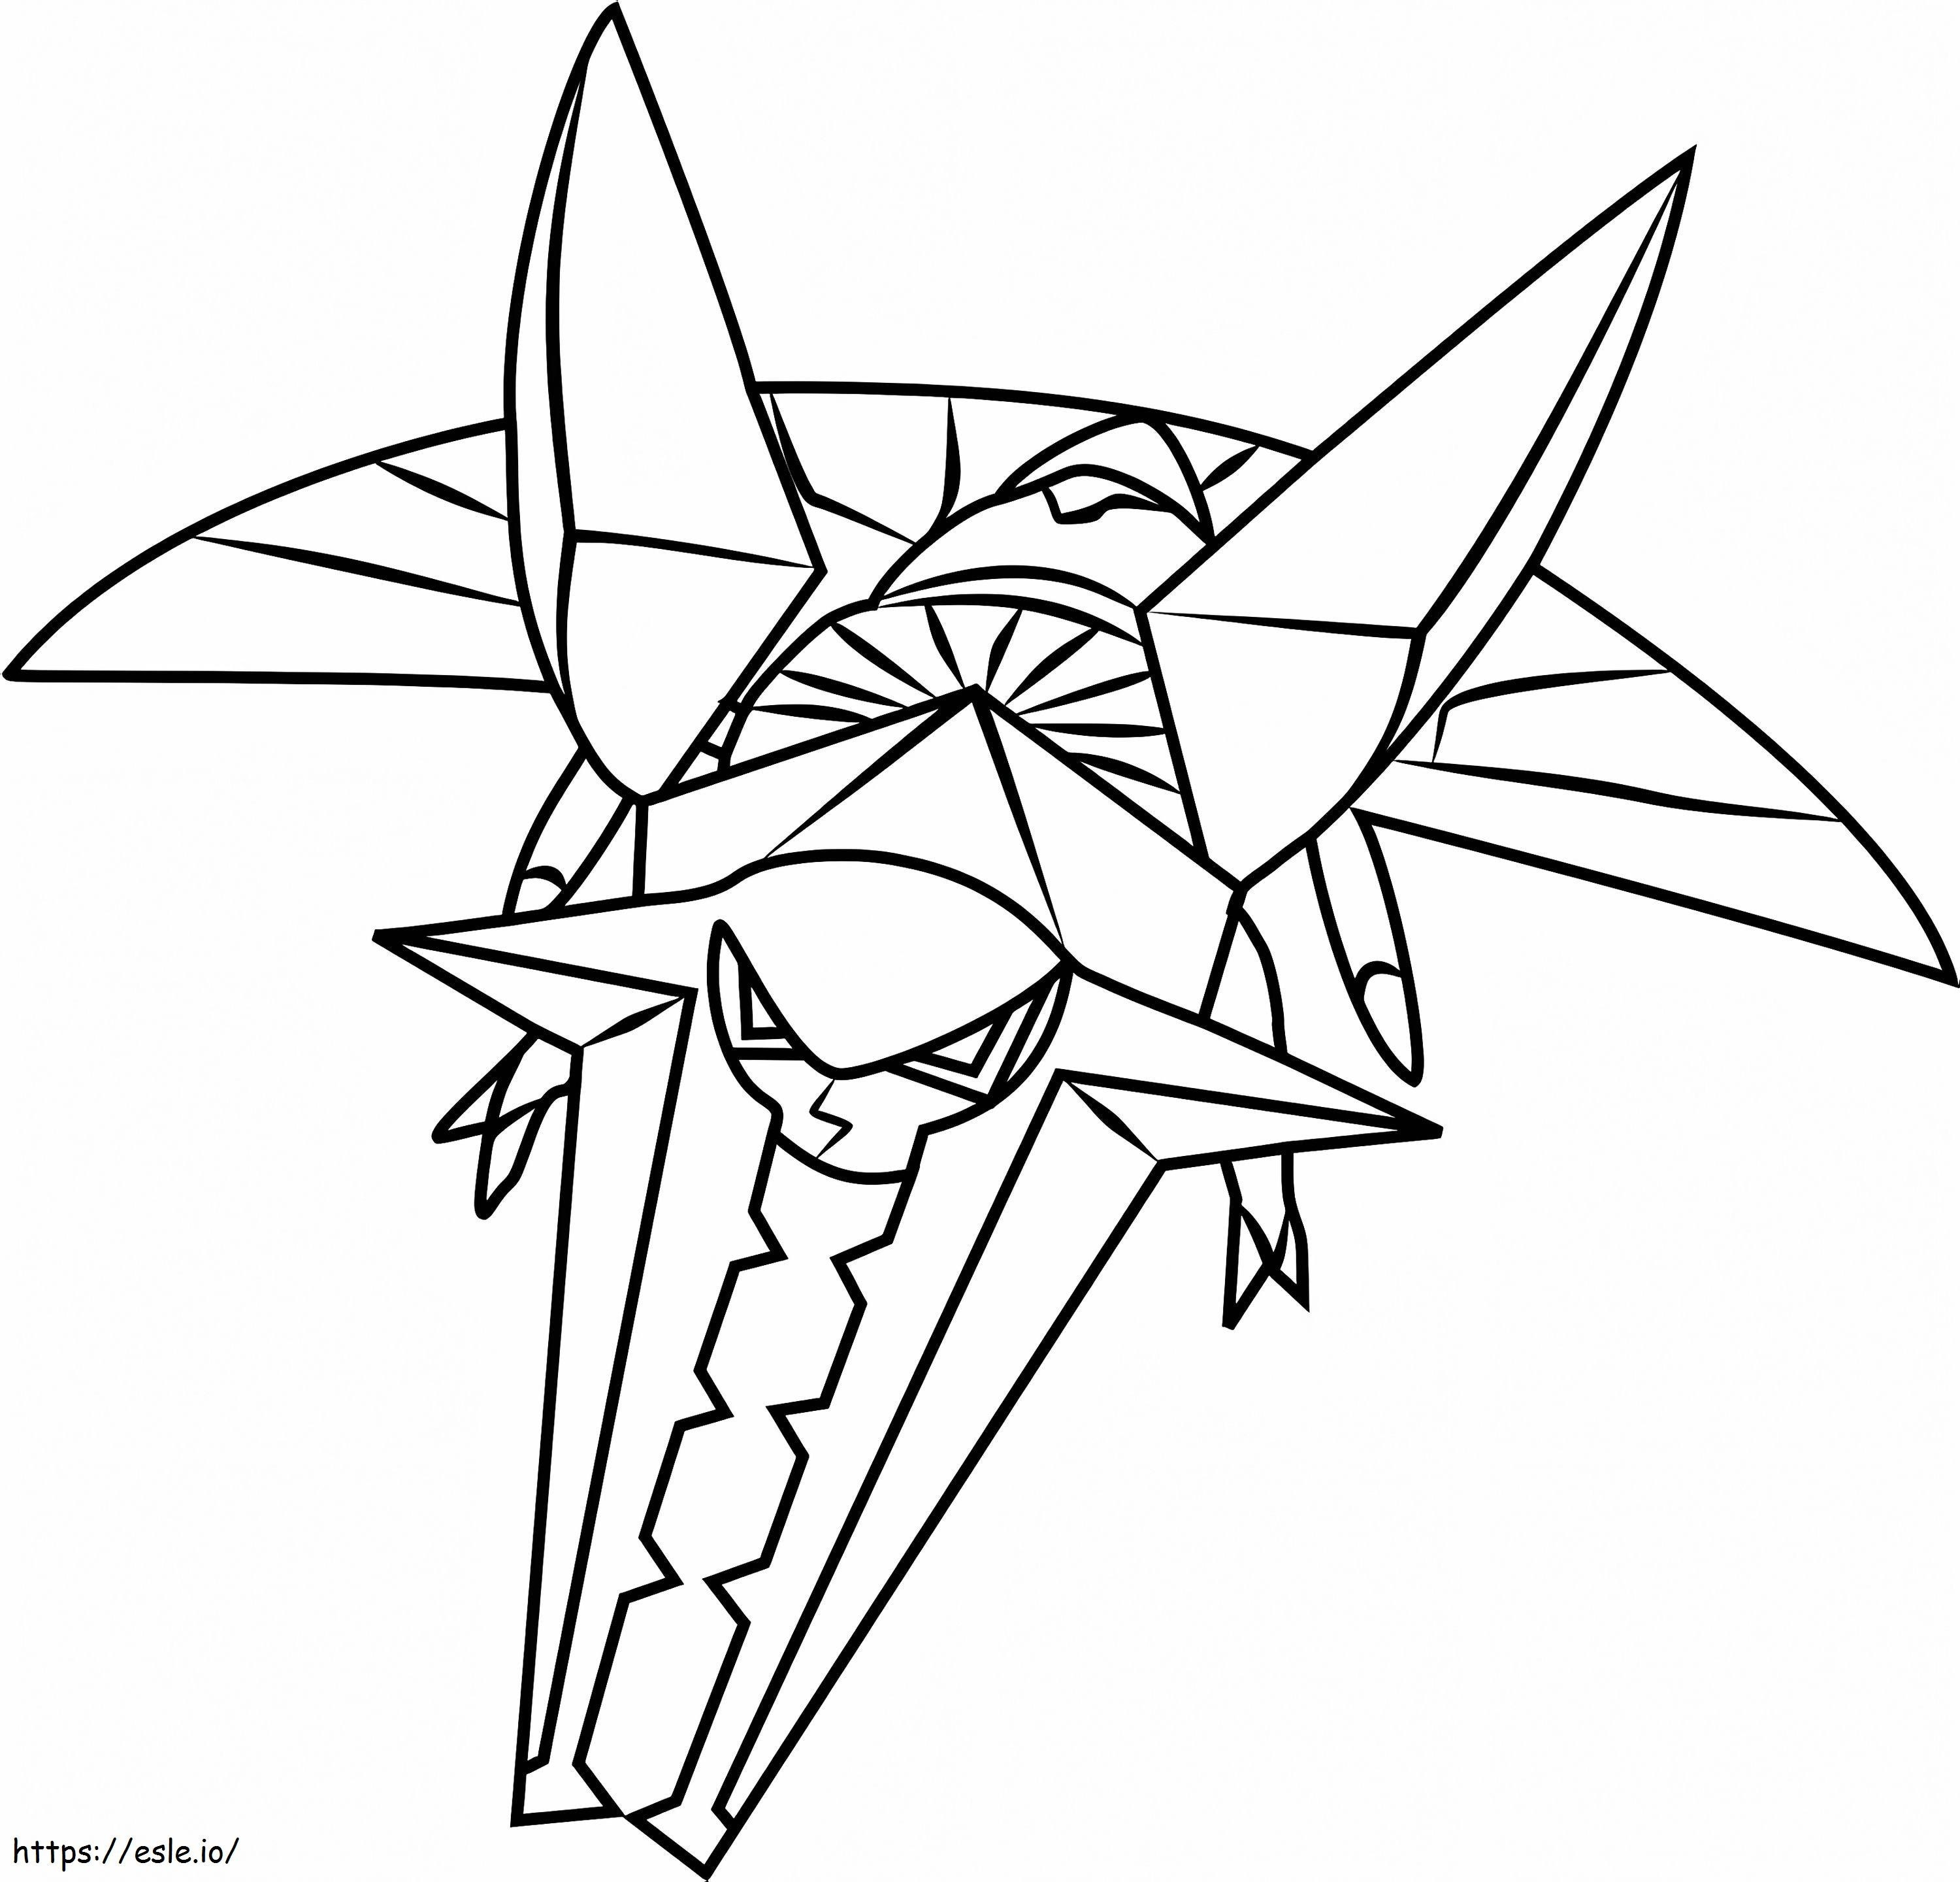 1529554487 2 coloring page